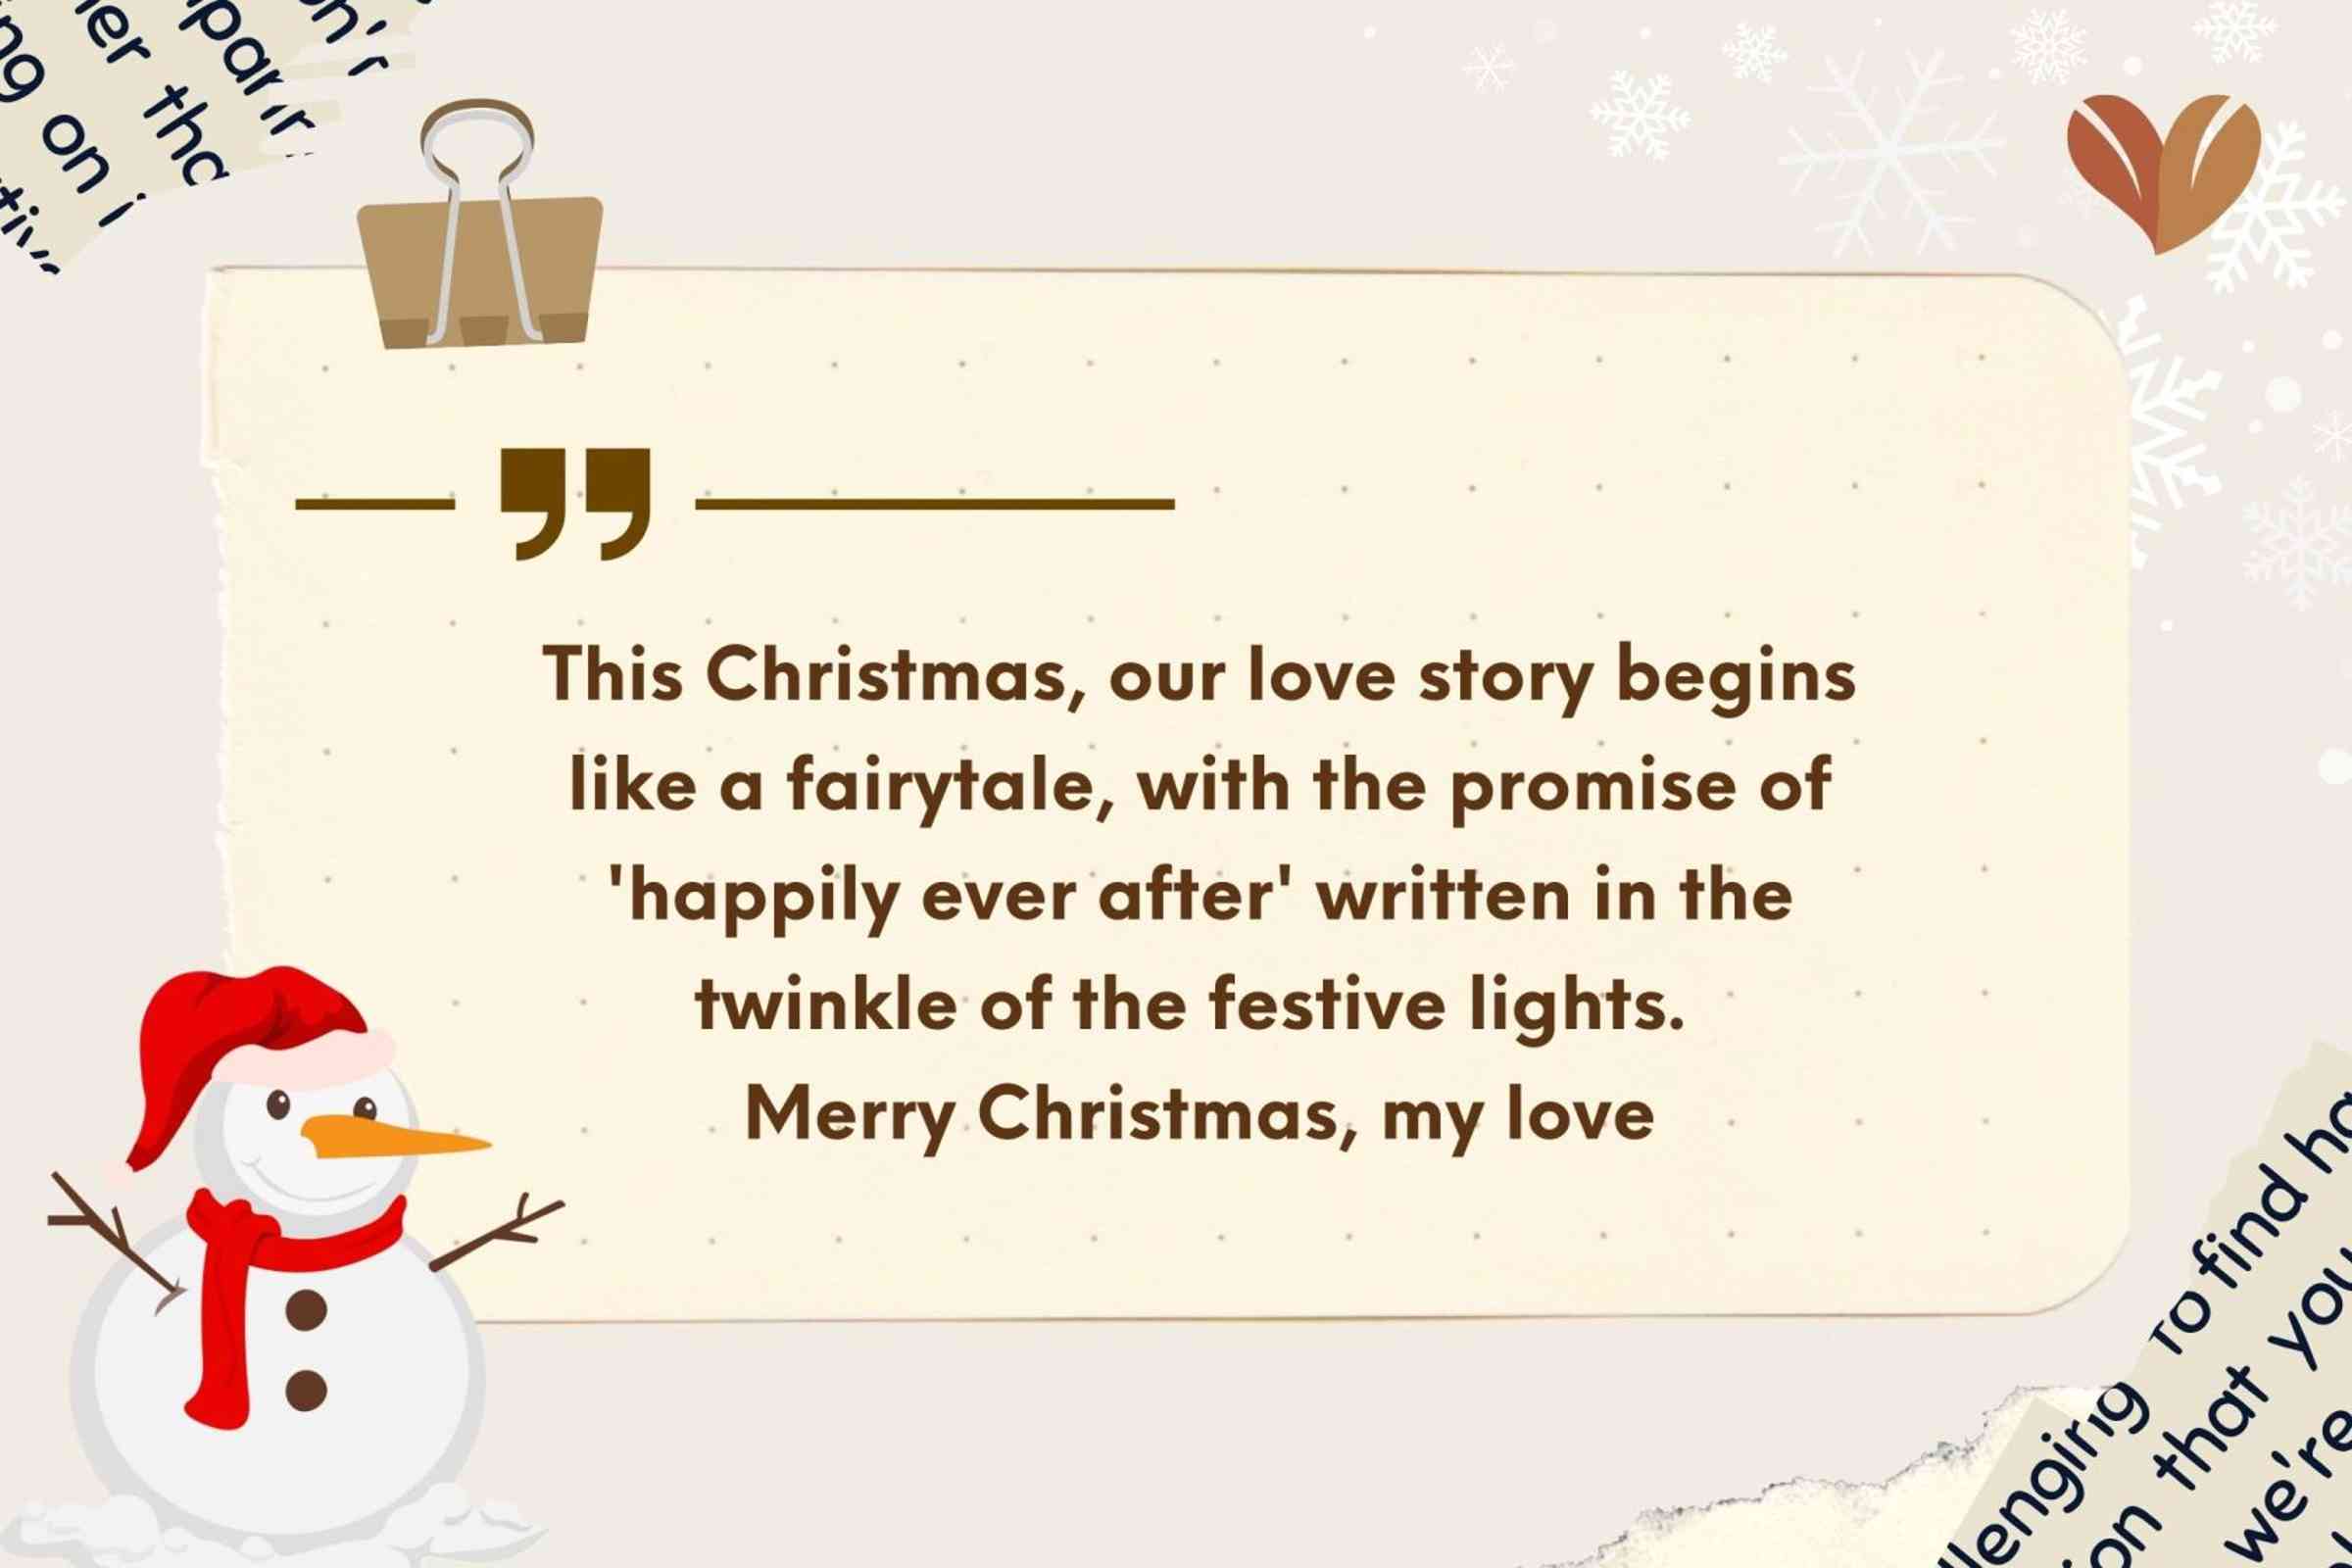 This Christmas, our love story begins like a fairytale, with the promise of 'happily ever after' written in the twinkle of the festive lights. Merry Christmas, my love